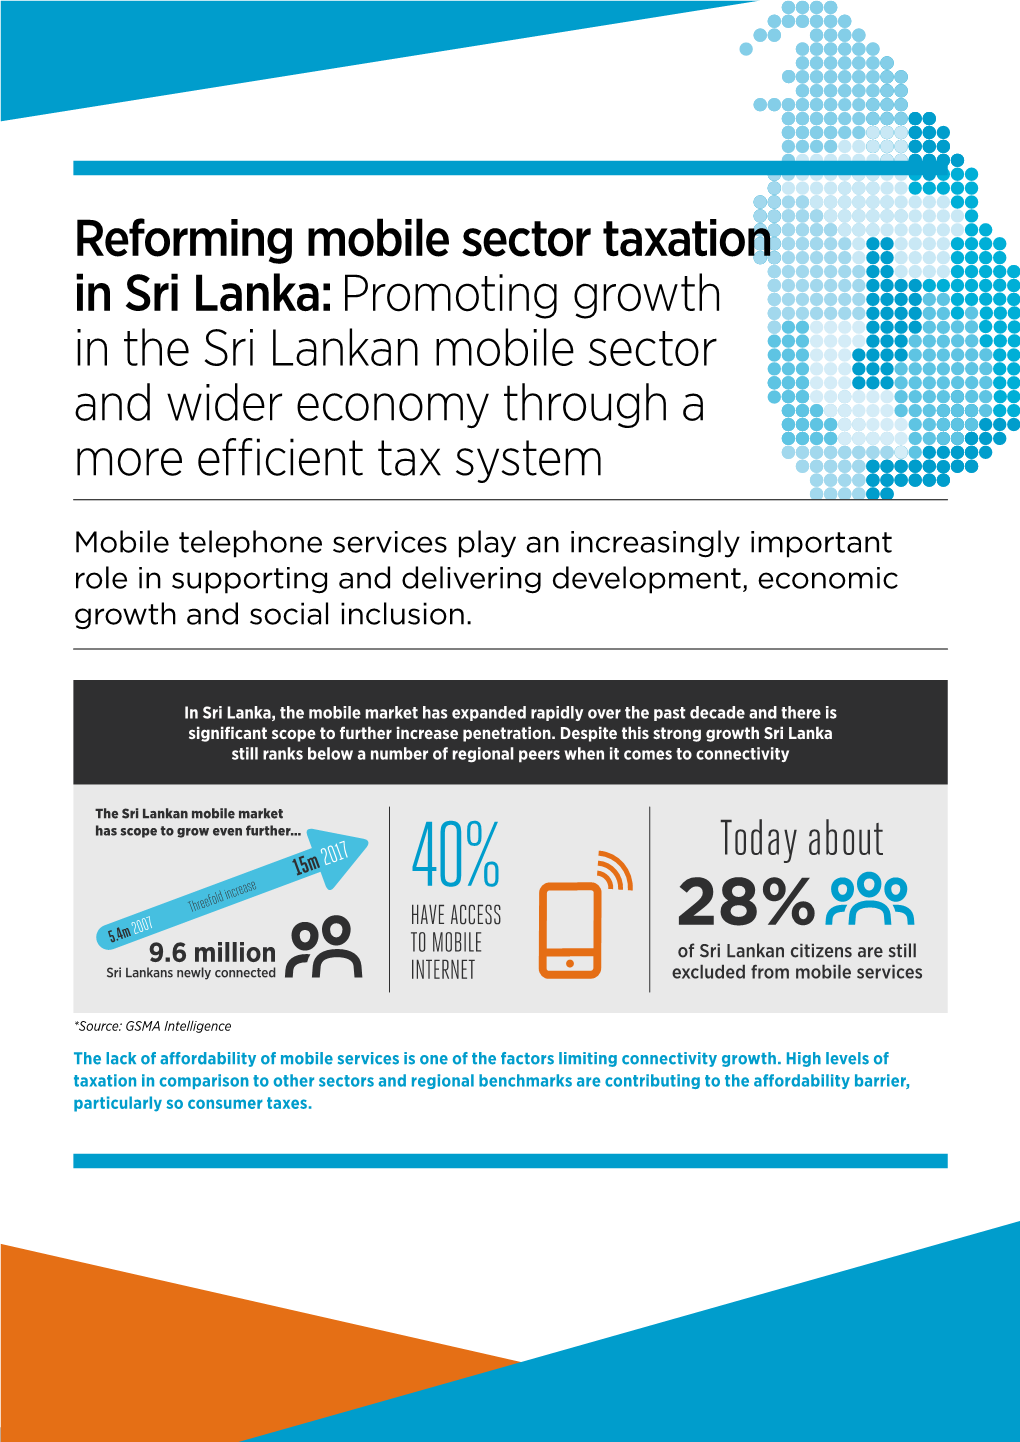 Reforming Mobile Sector Taxation in Sri Lanka: Promoting Growth in the Sri Lankan Mobile Sector and Wider Economy Through a More Efficient Tax System